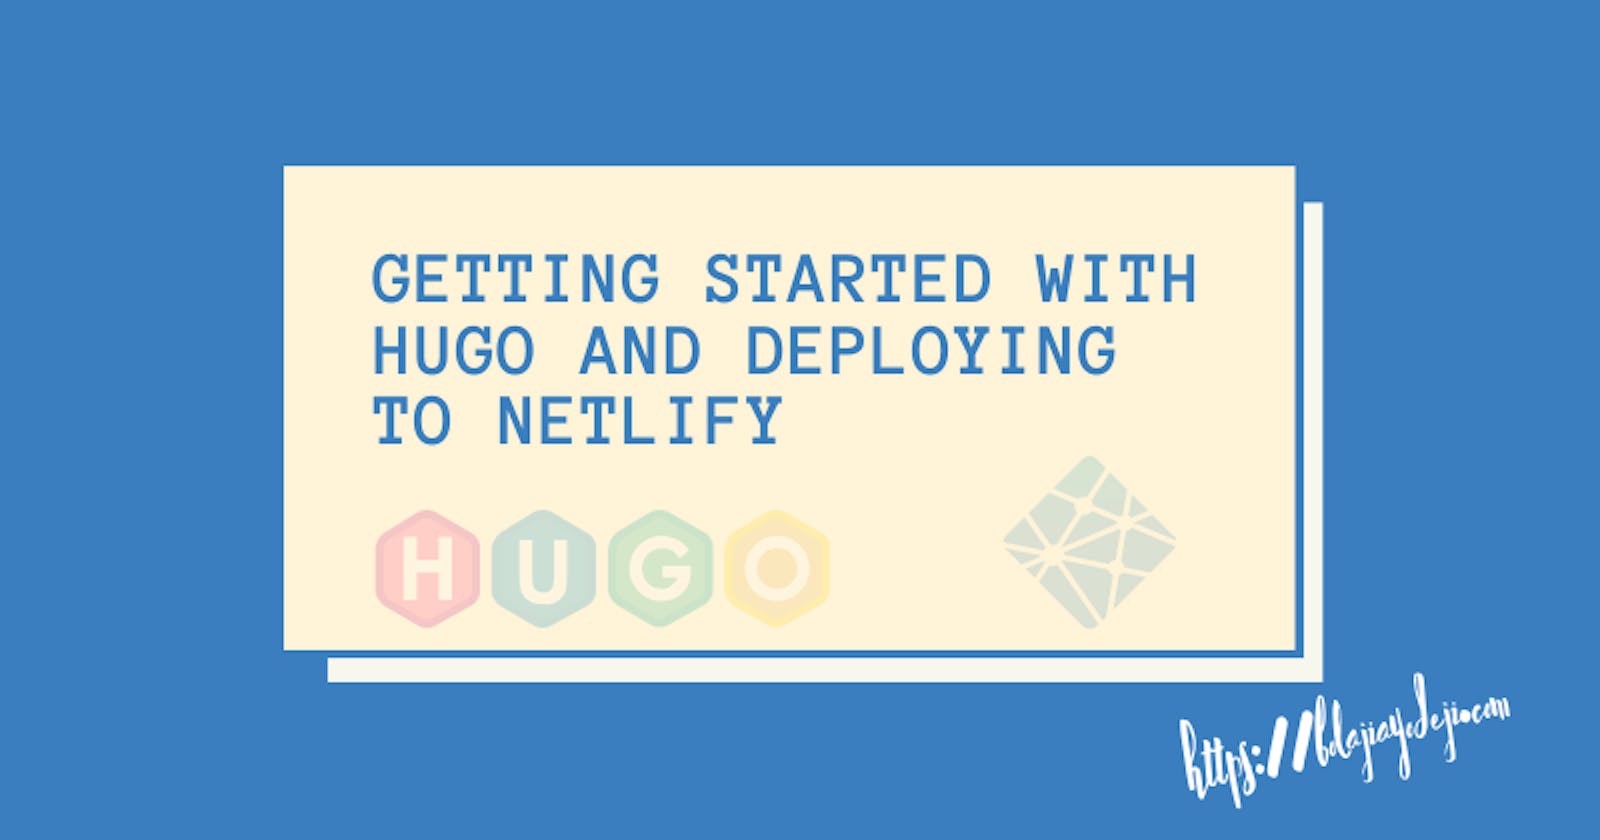 Getting Started with Hugo and Deploying to Netlify